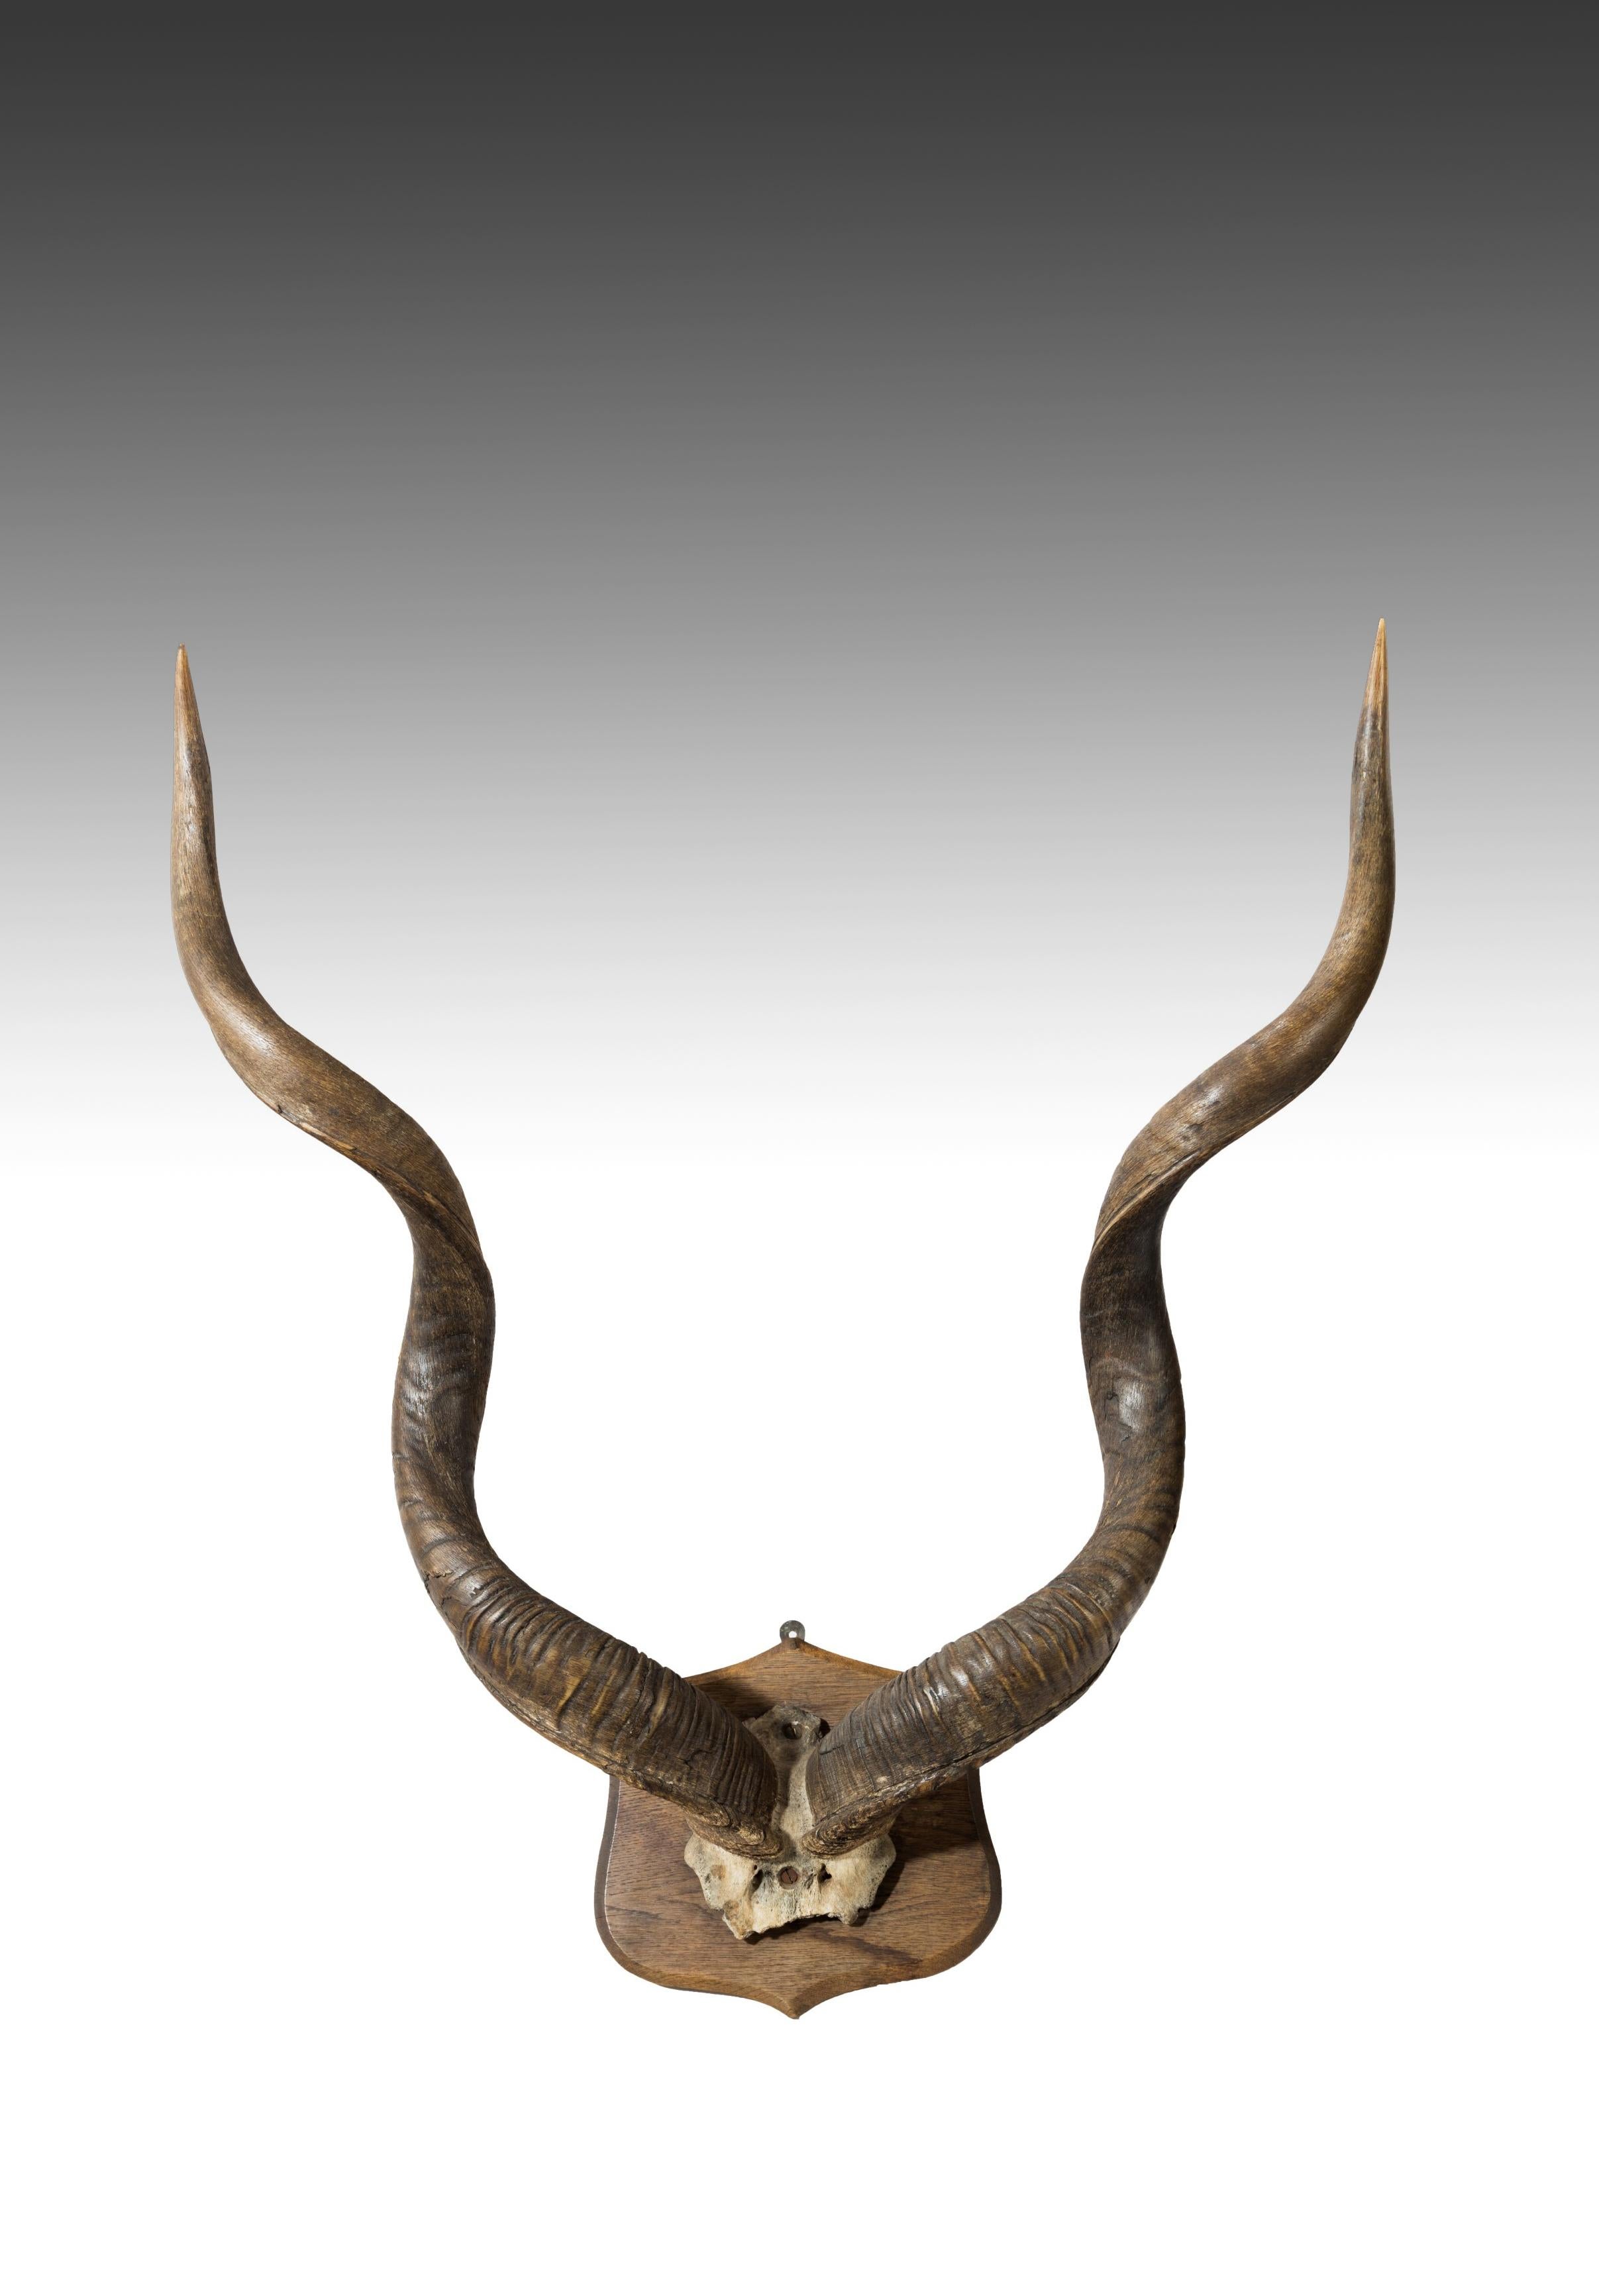 A large set of late Victorian / Edwardian Kudu antlers / horns, circa 1880-1900.

Mounted on an original oak shield shaped plaque, this set of horns are of grand scale and in perfect symmetry with an amazing color.

In excellent condition and a